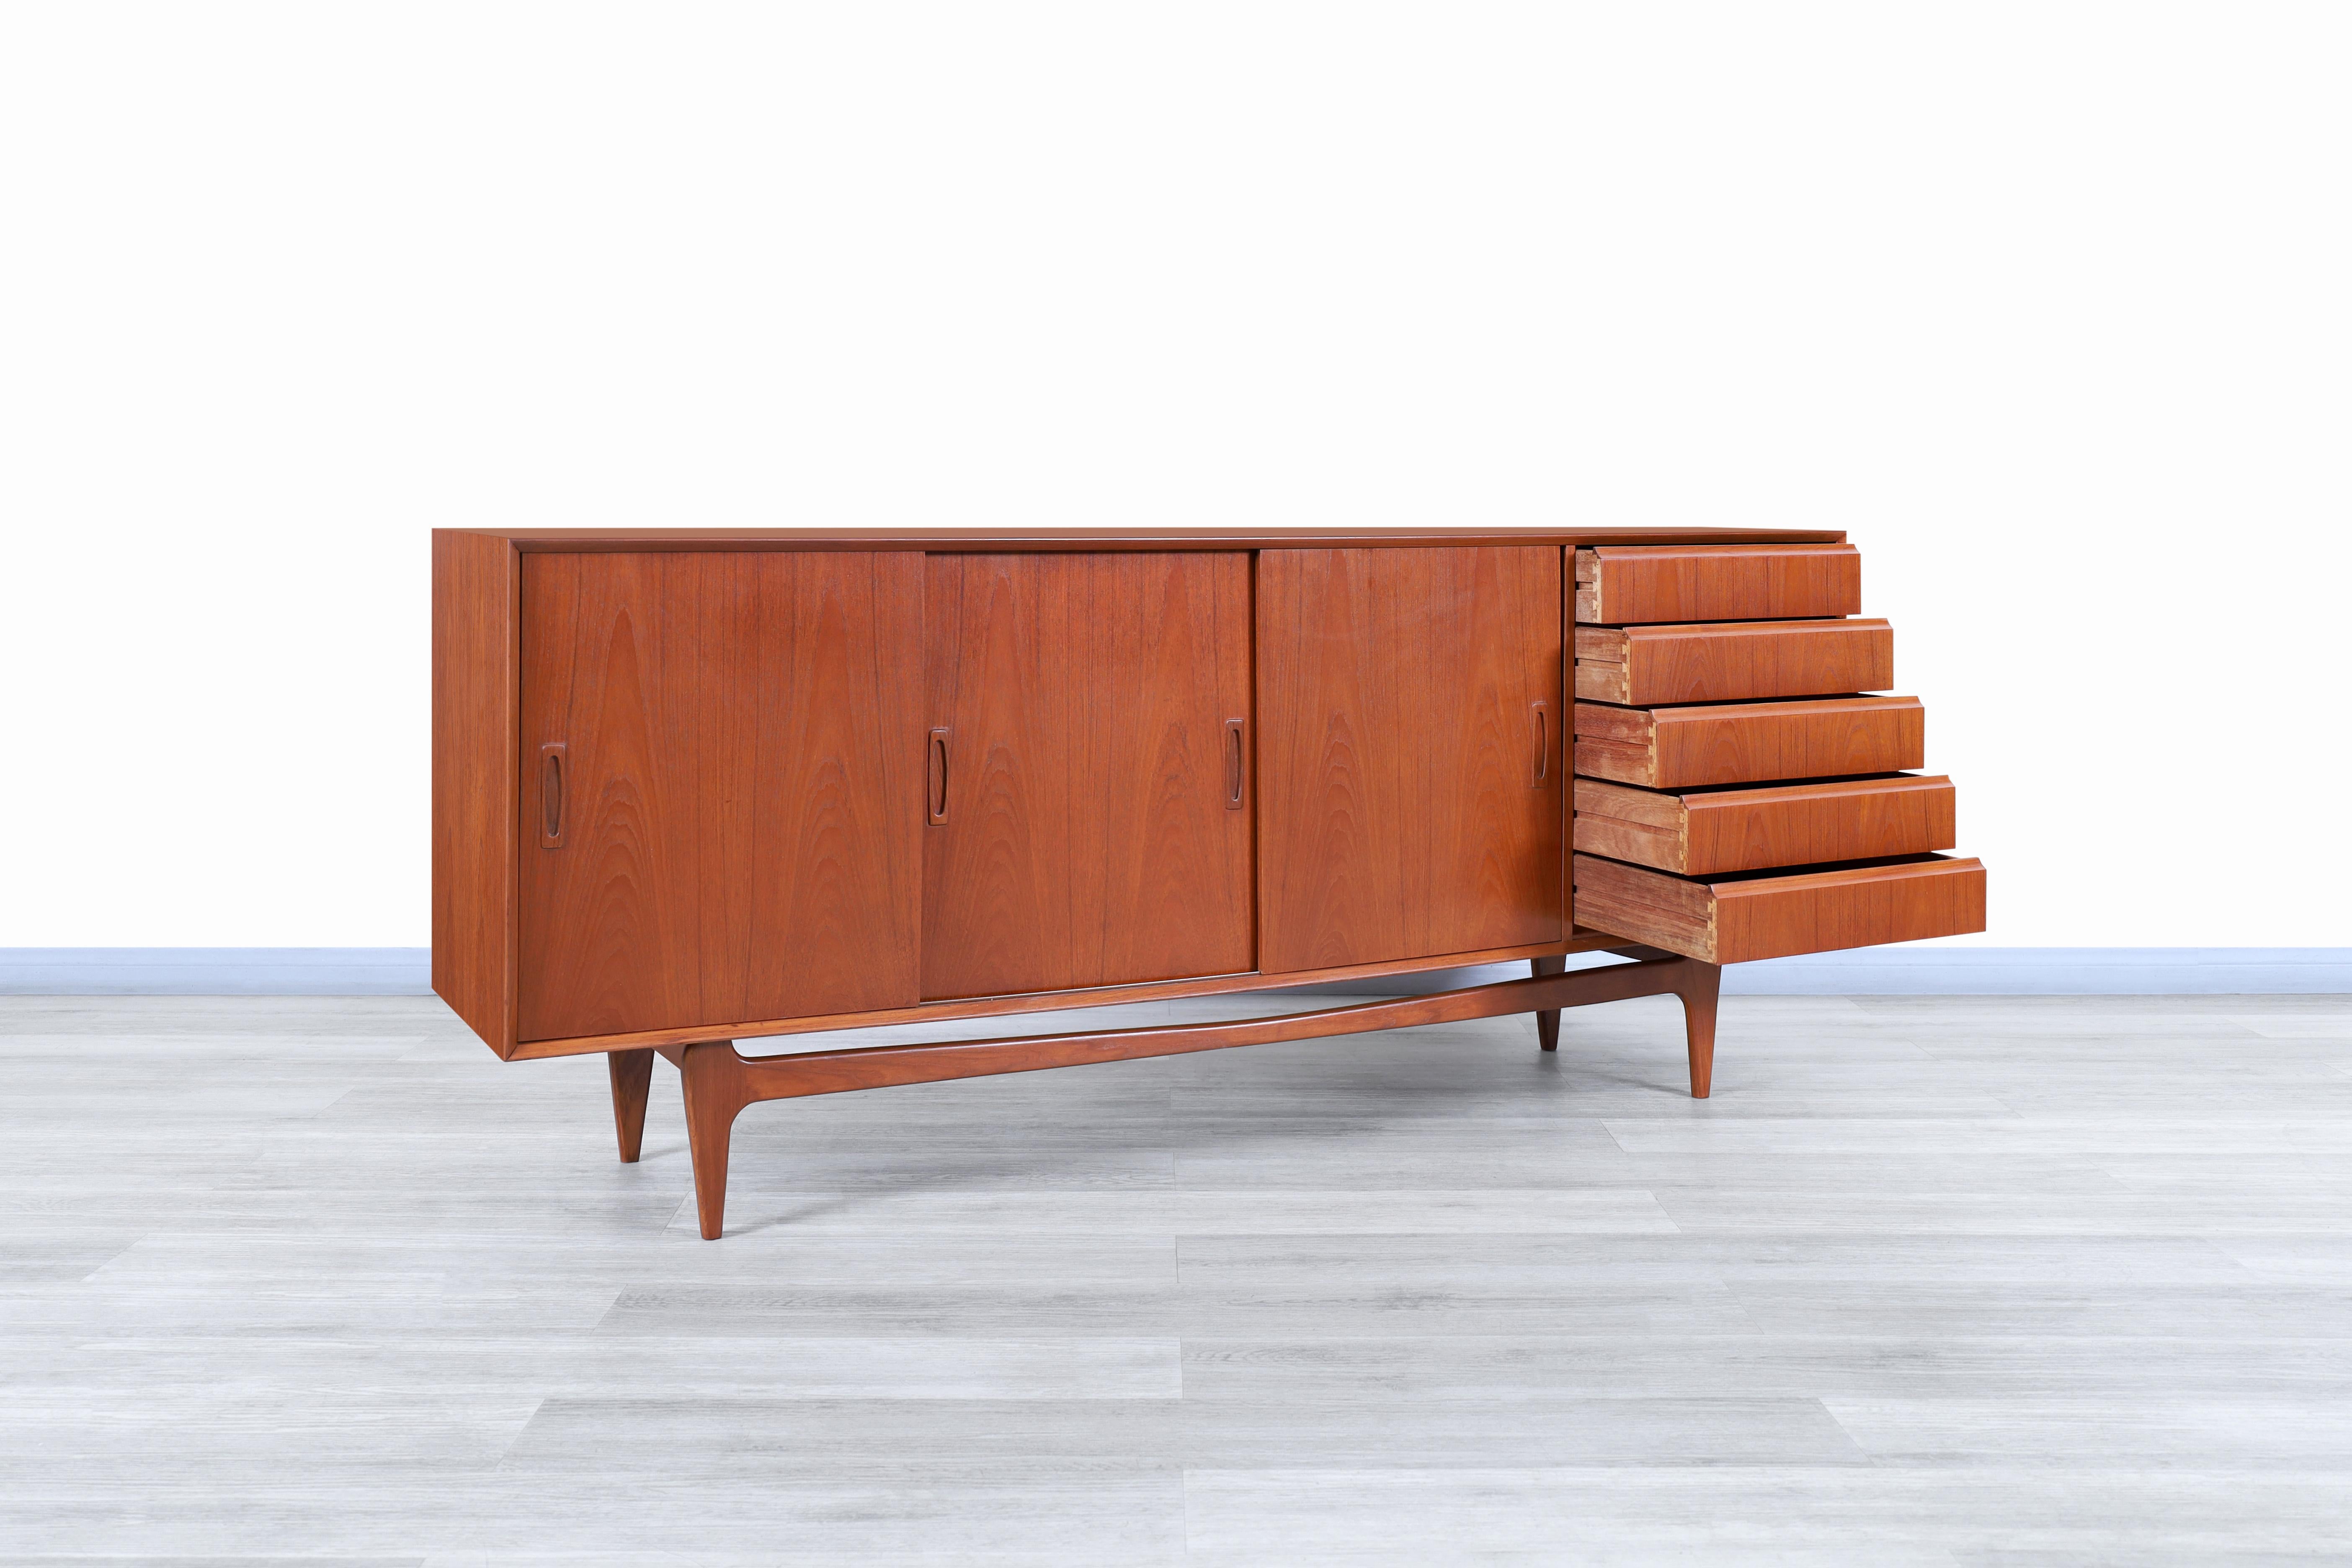 Danish Modern Teak Credenza In Excellent Condition For Sale In North Hollywood, CA